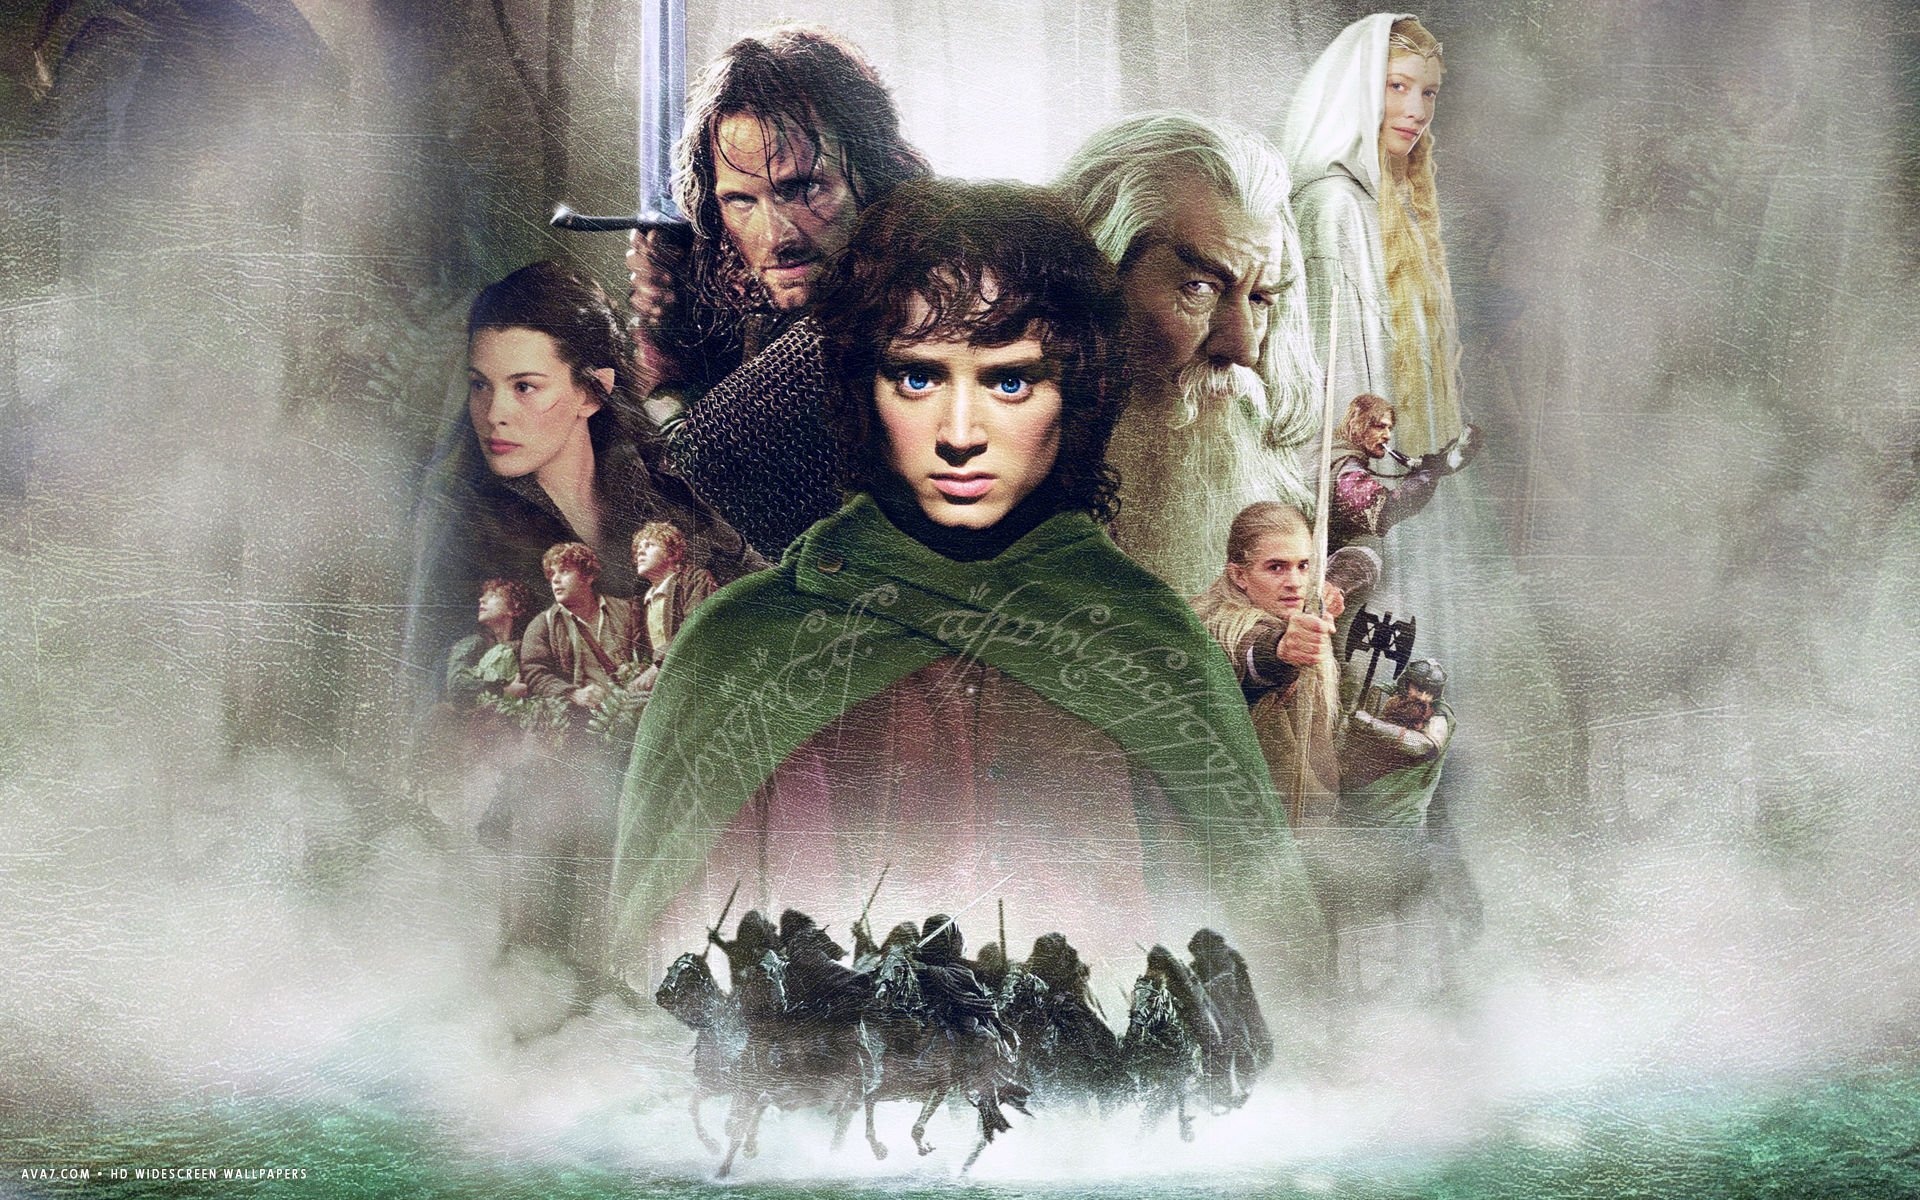 Fellowship of the Ring wallpaper, Lord of the Rings, Fantasy art, 1920x1200 HD Desktop